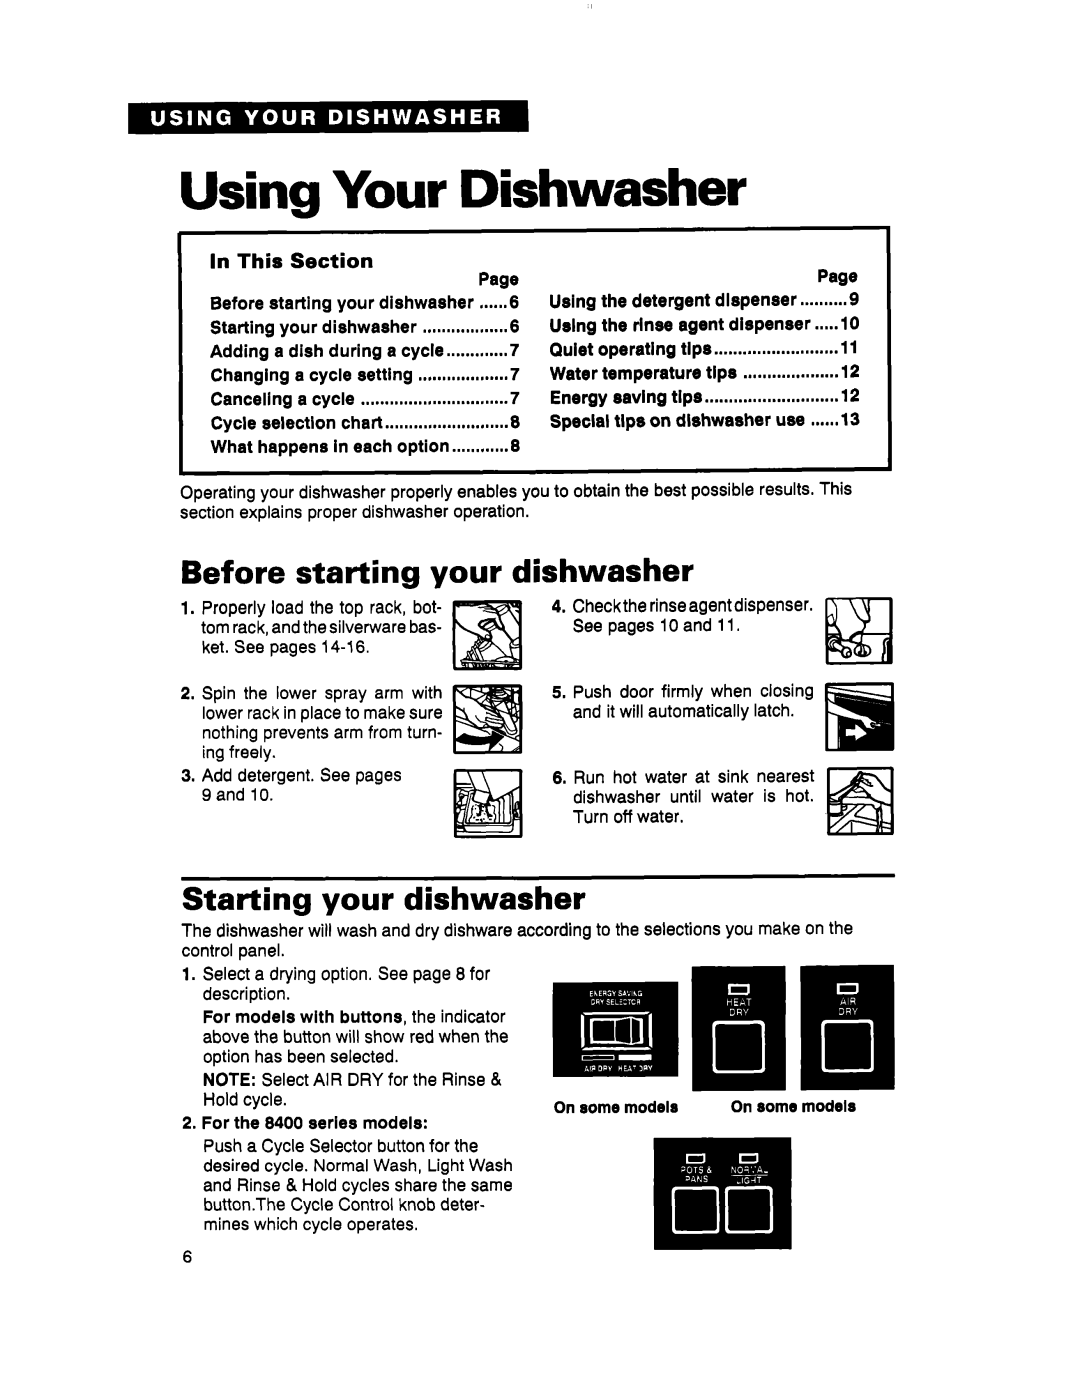 Whirlpool DU8100 Using Your Dishwasher, Before starting your dishwasher, Starting your dishwasher, In This, Section 